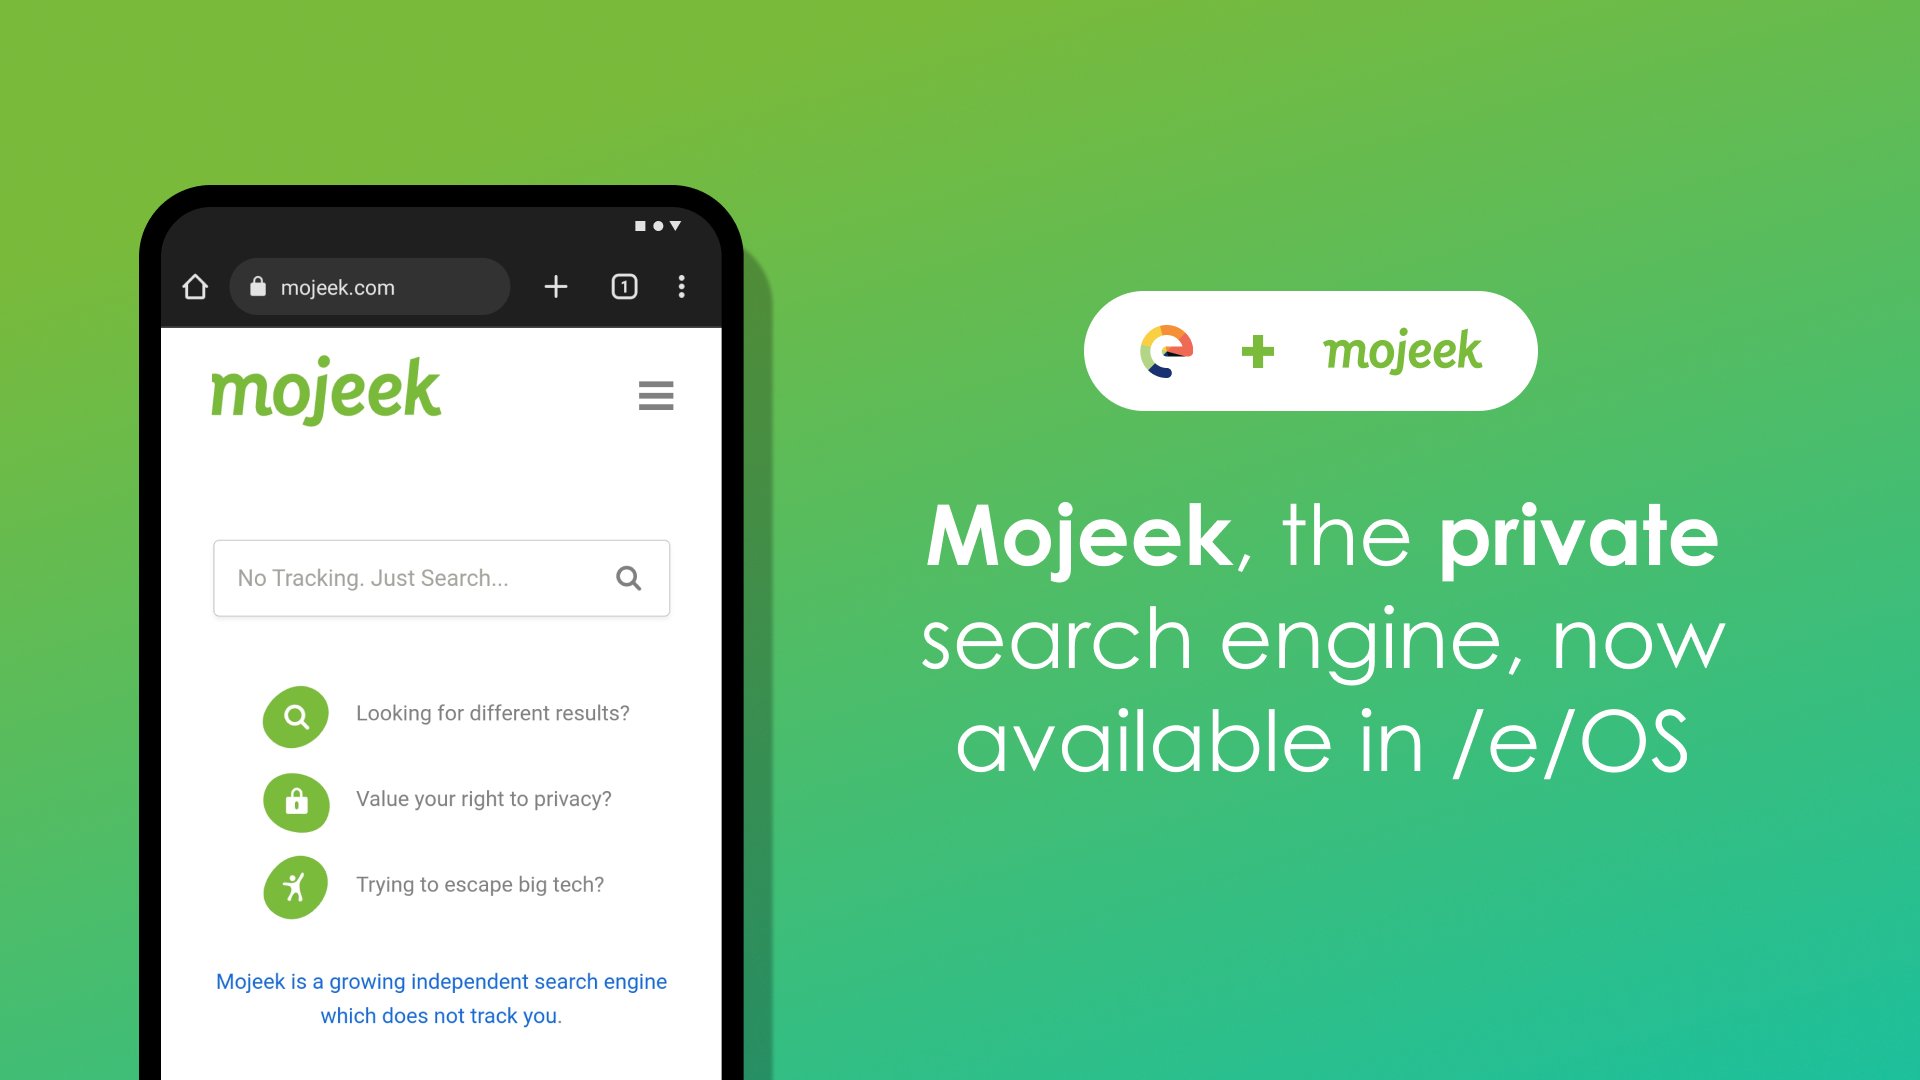 an image showing Mojeek being used on a Murena device running /e/OS